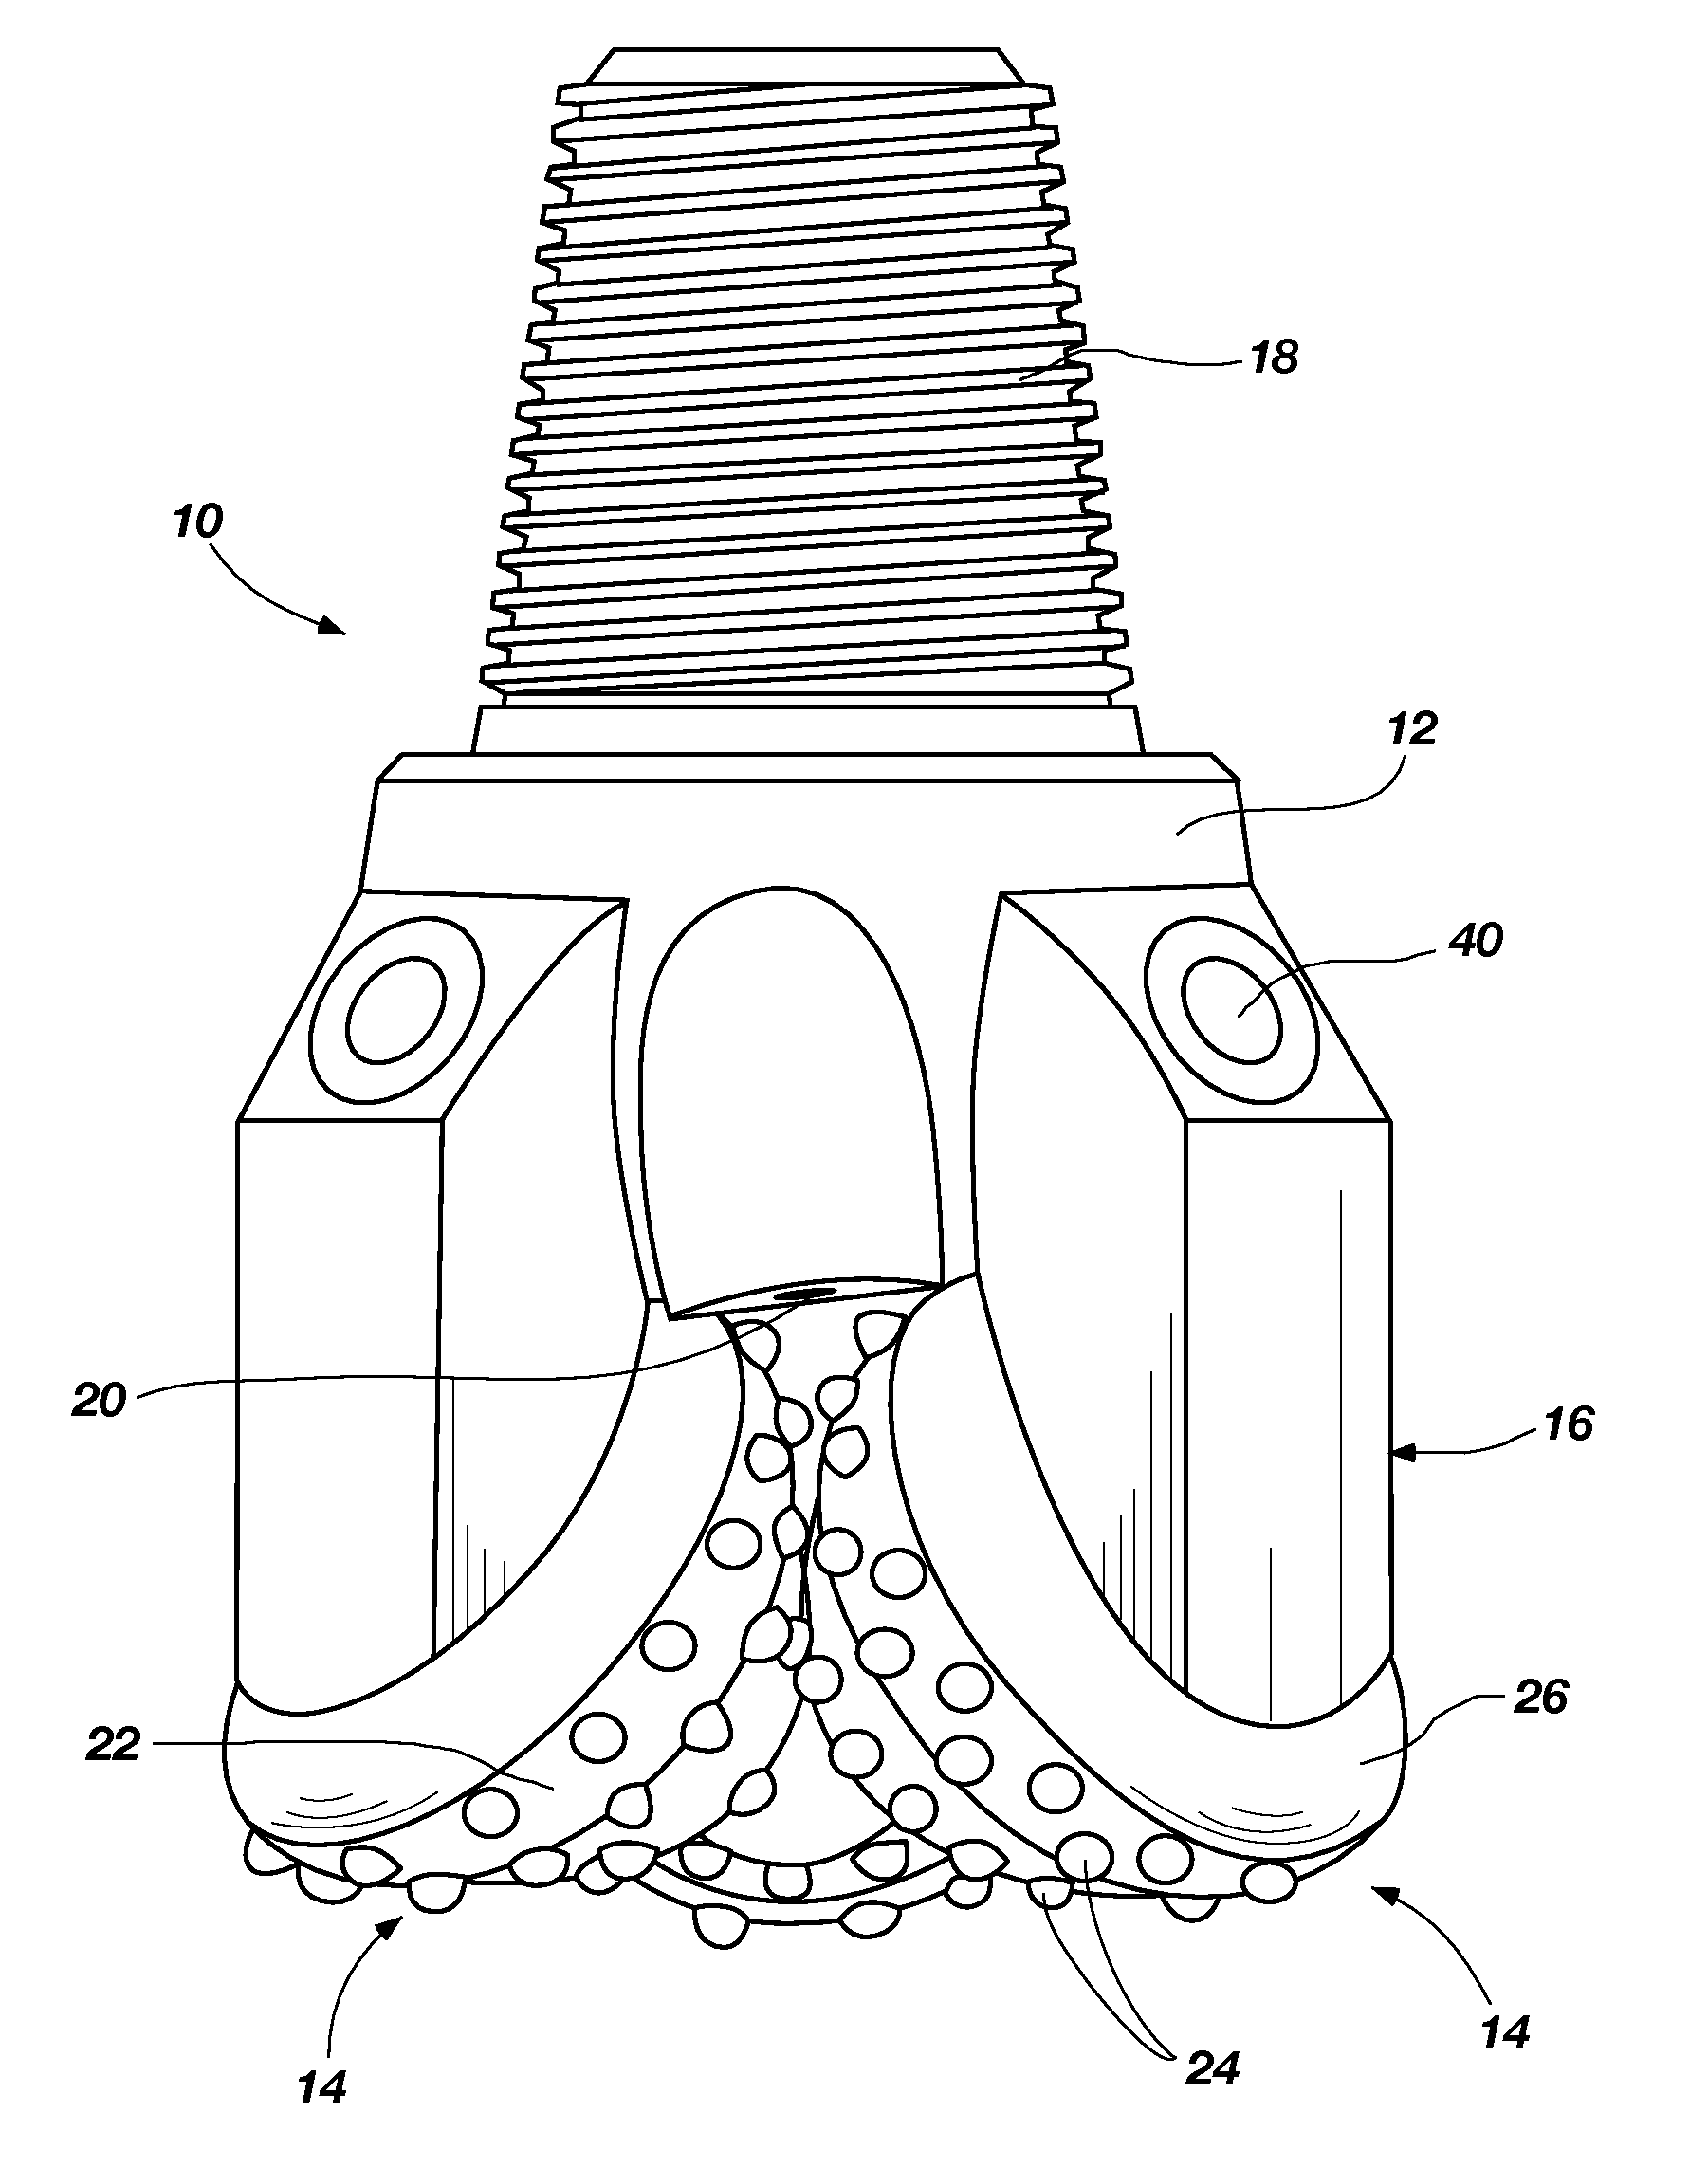 Method of selectively adapting material properties across a rock bit cone